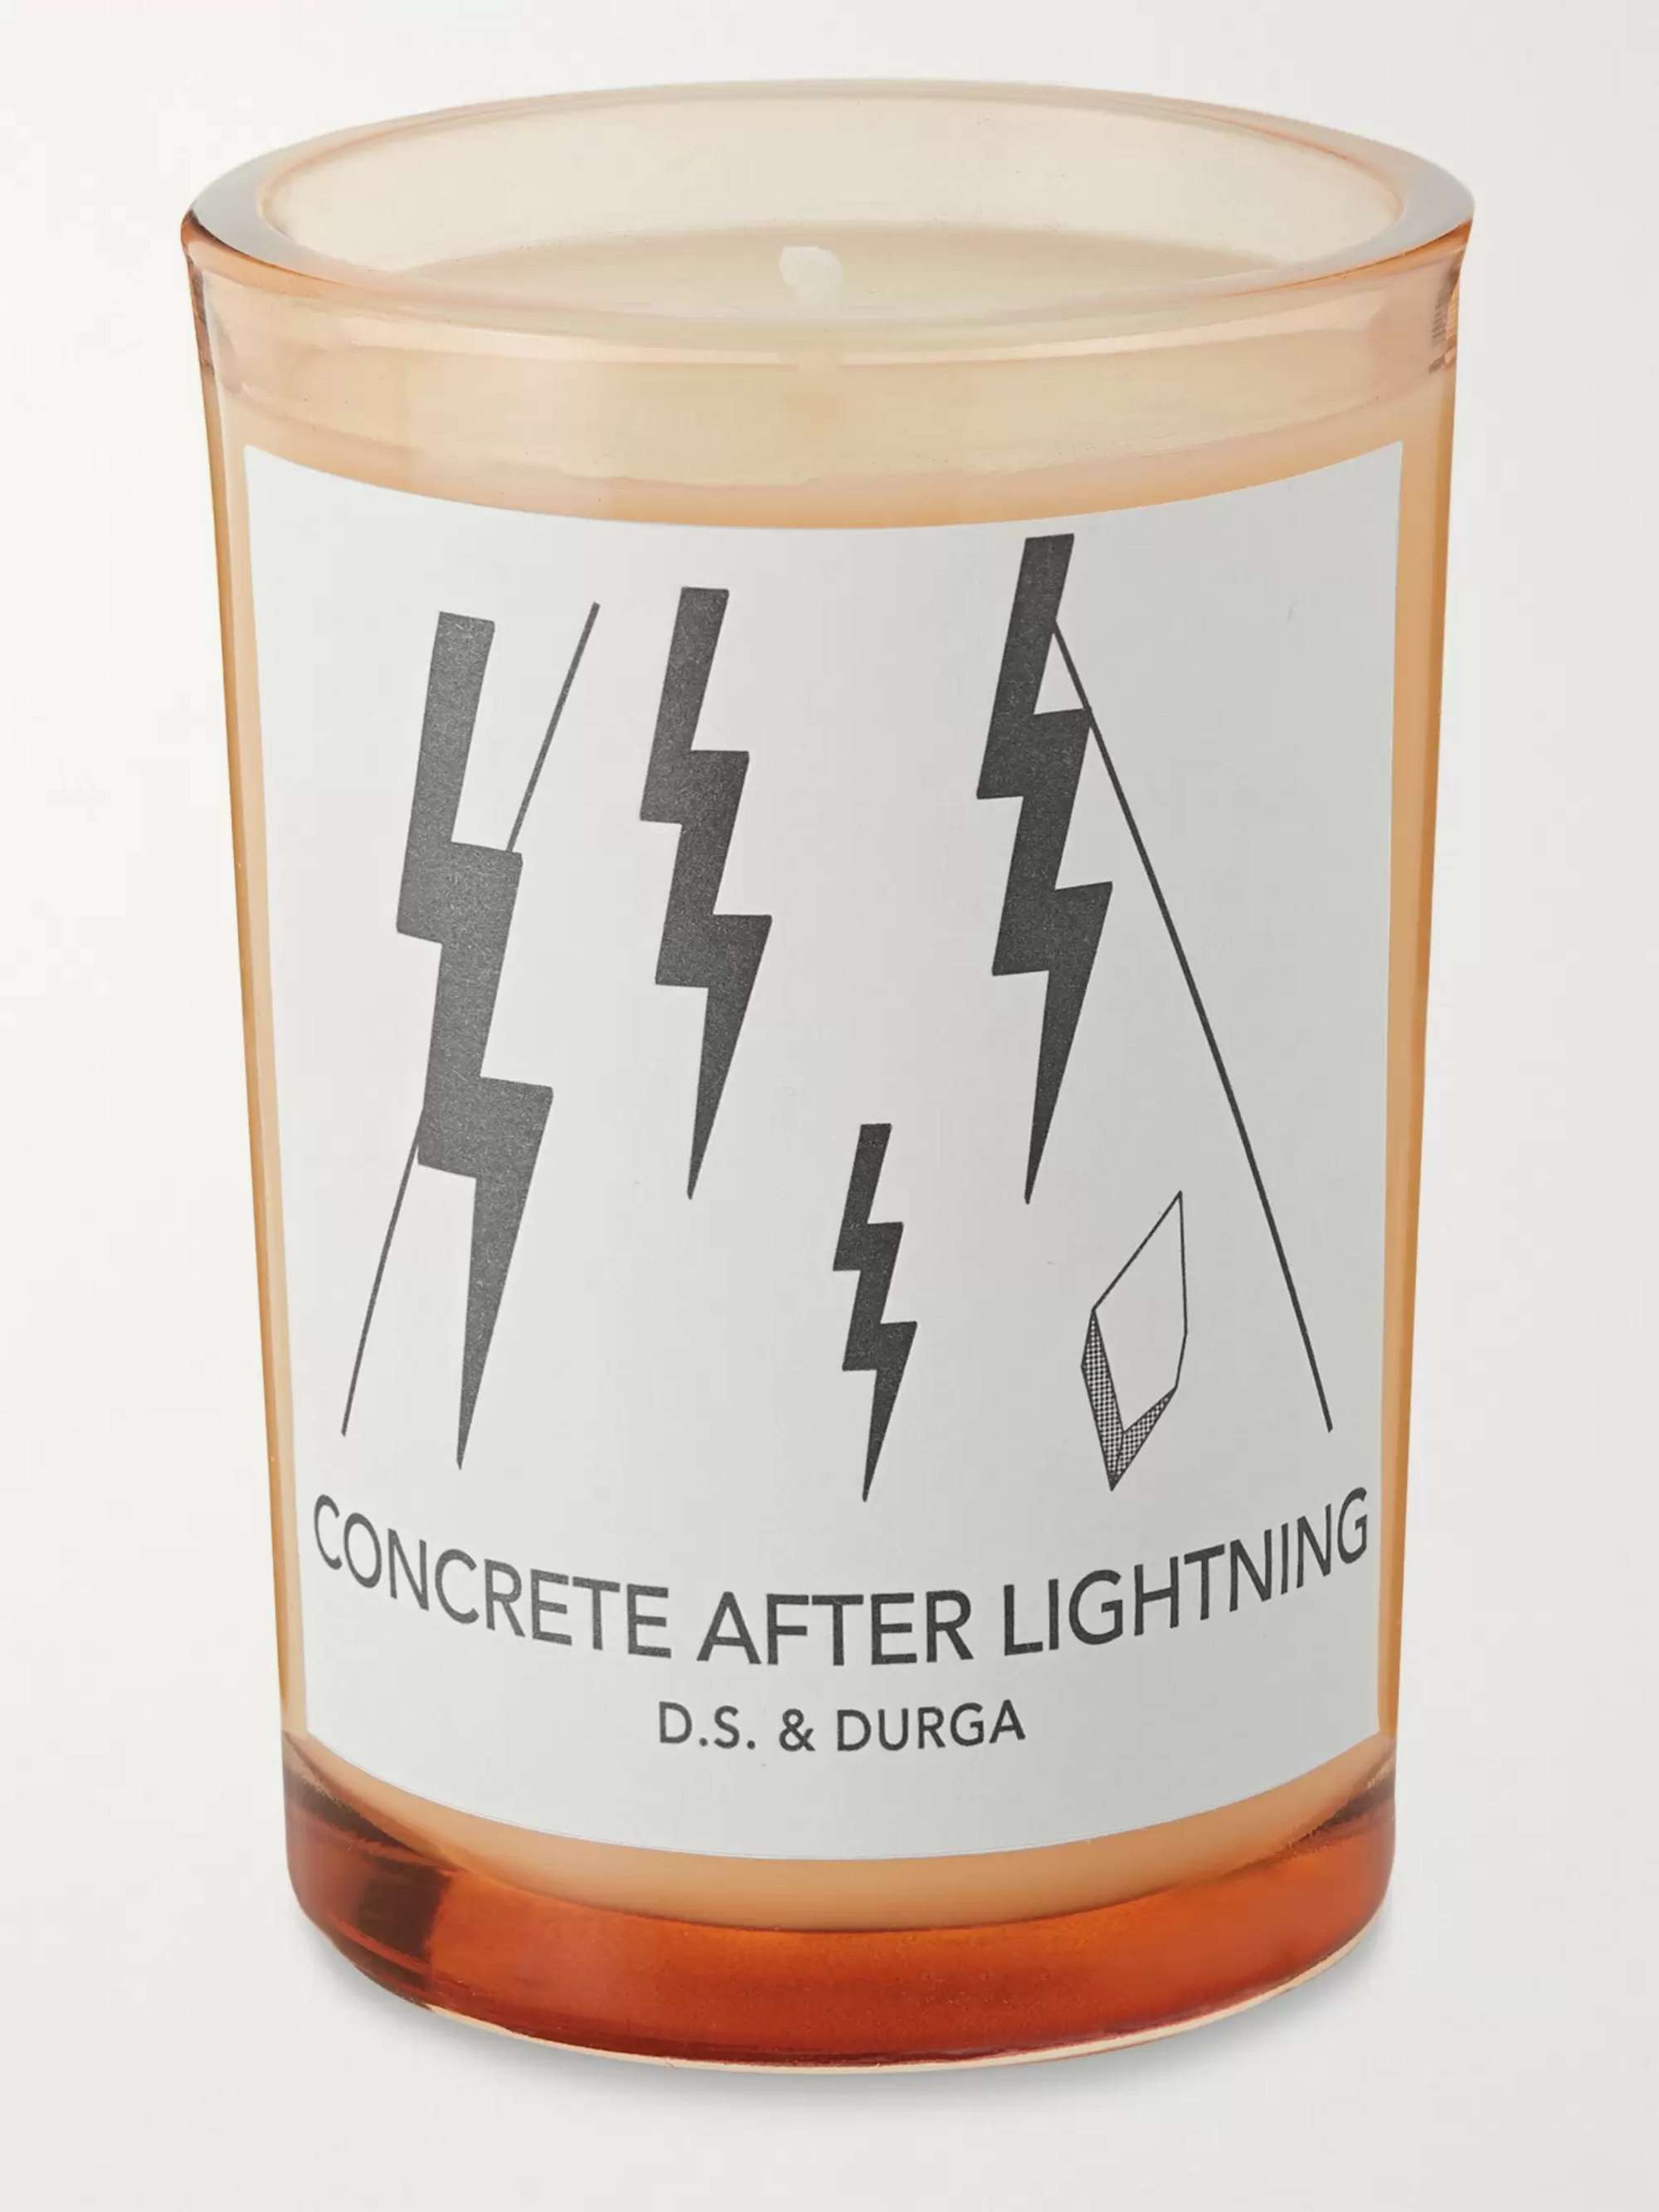 D.S. & DURGA Concrete After Lightning Scented Candle, 200g